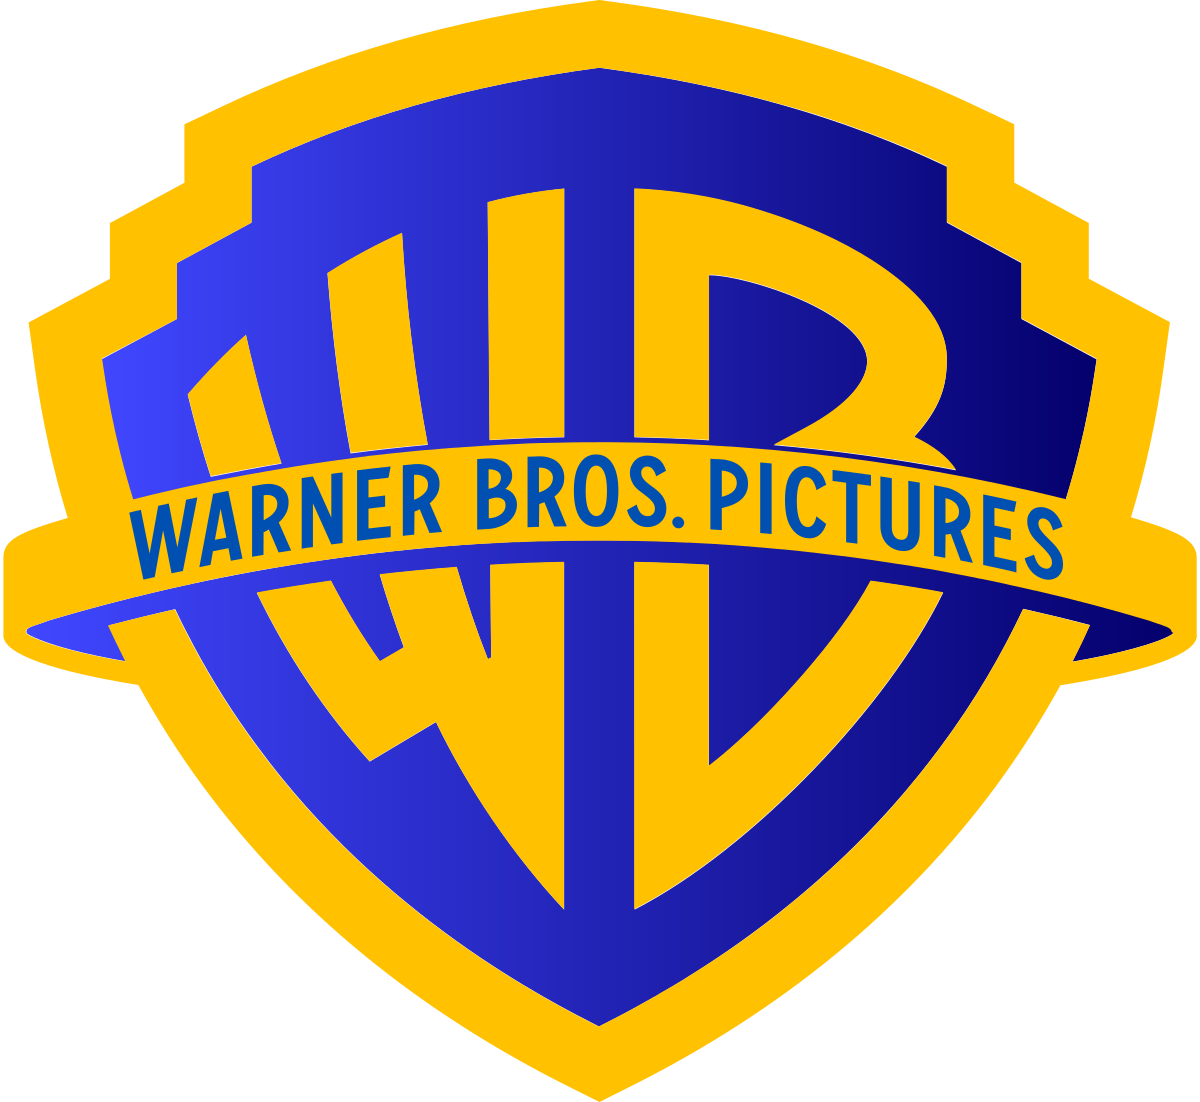 List of Famous Movie and Film Production Company Logos - BrandonGaille.com